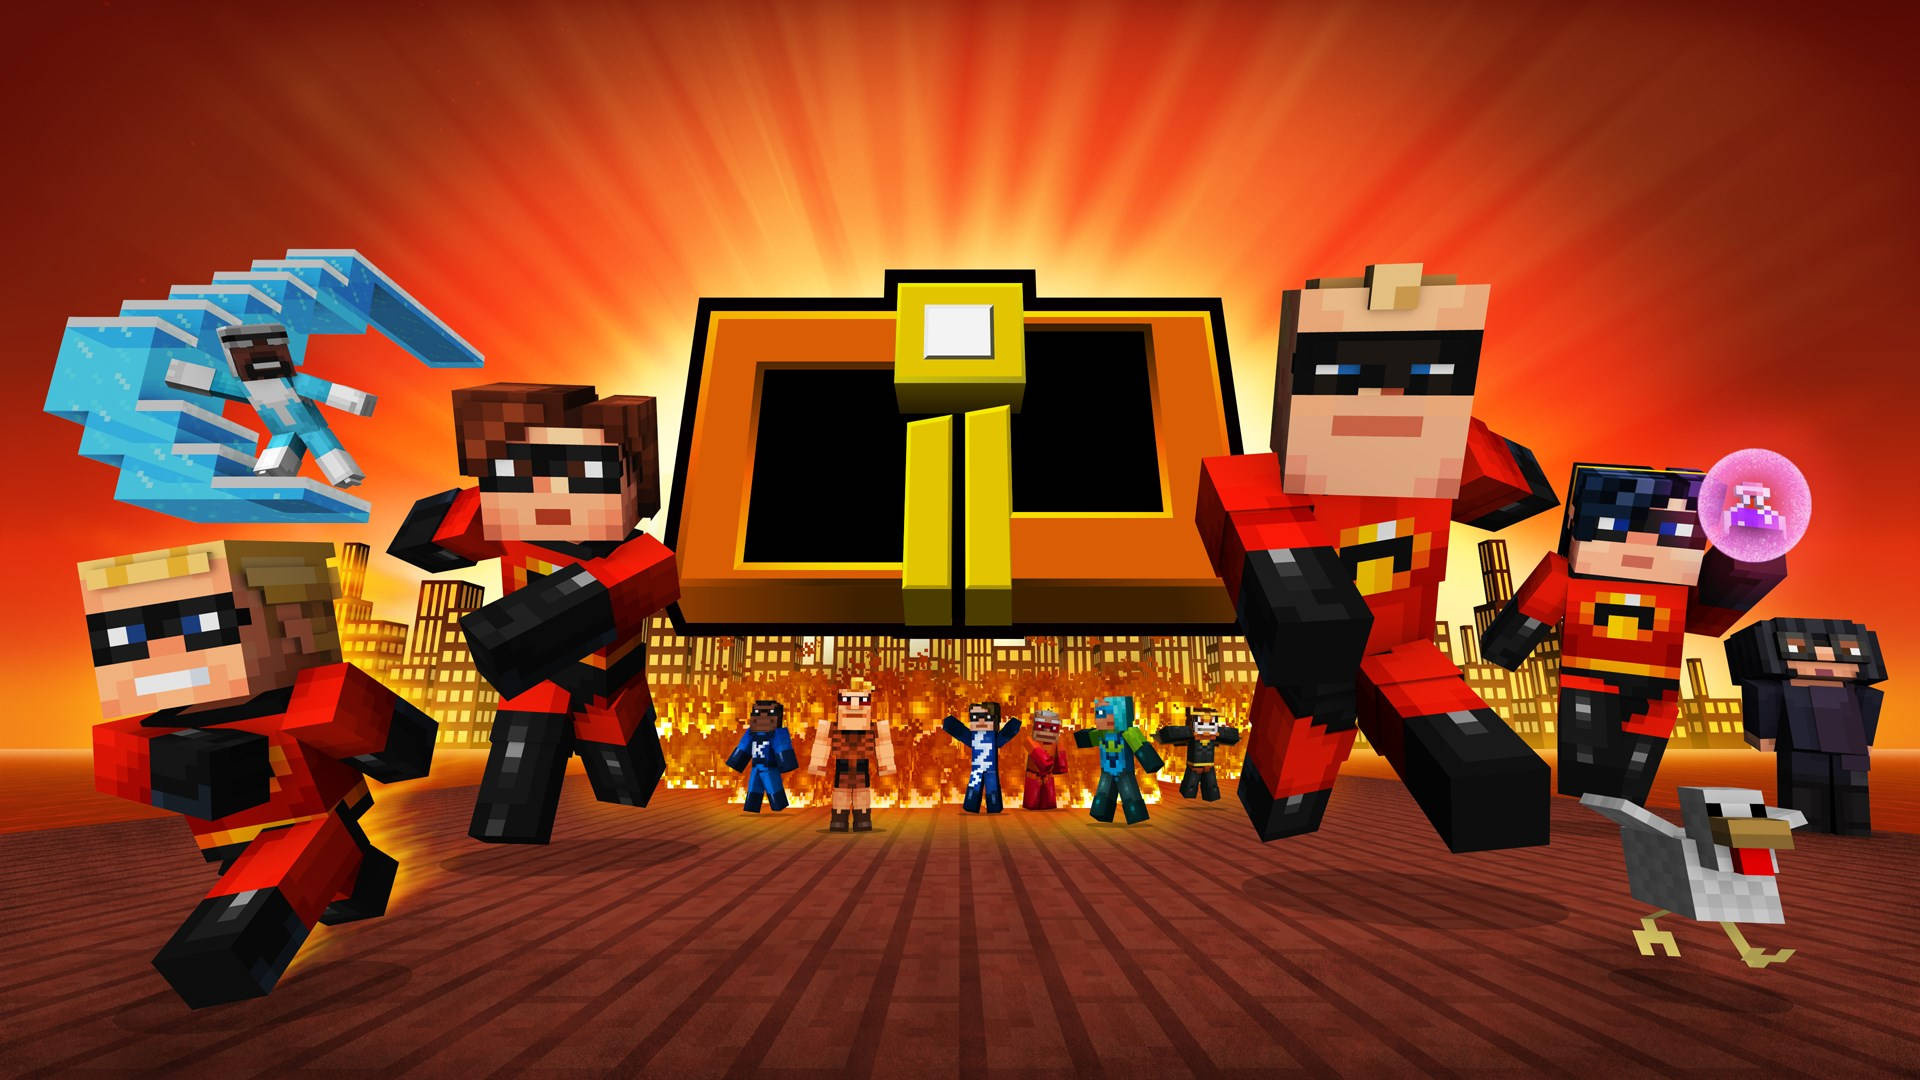 Explore The Incredibles with the Minecraft Skin Wallpaper